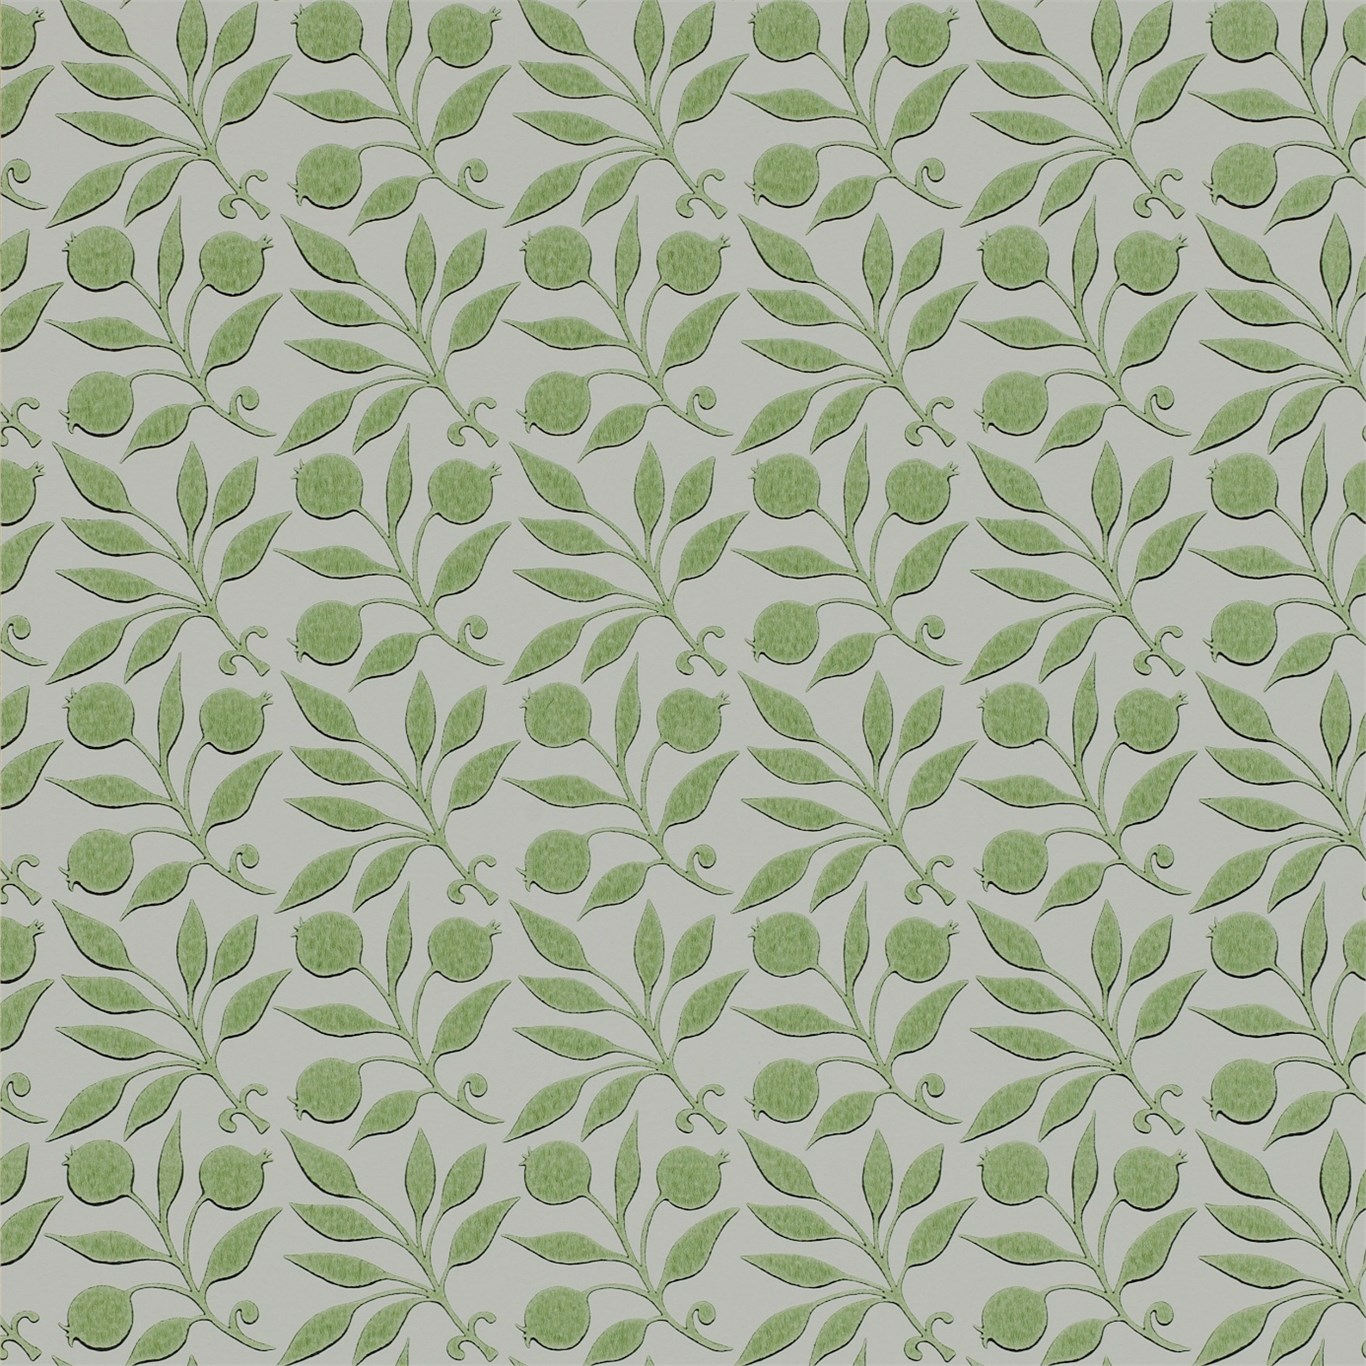 Snakeshead ForestThyme Wallpaper  Morris  Co by Sanderson Design